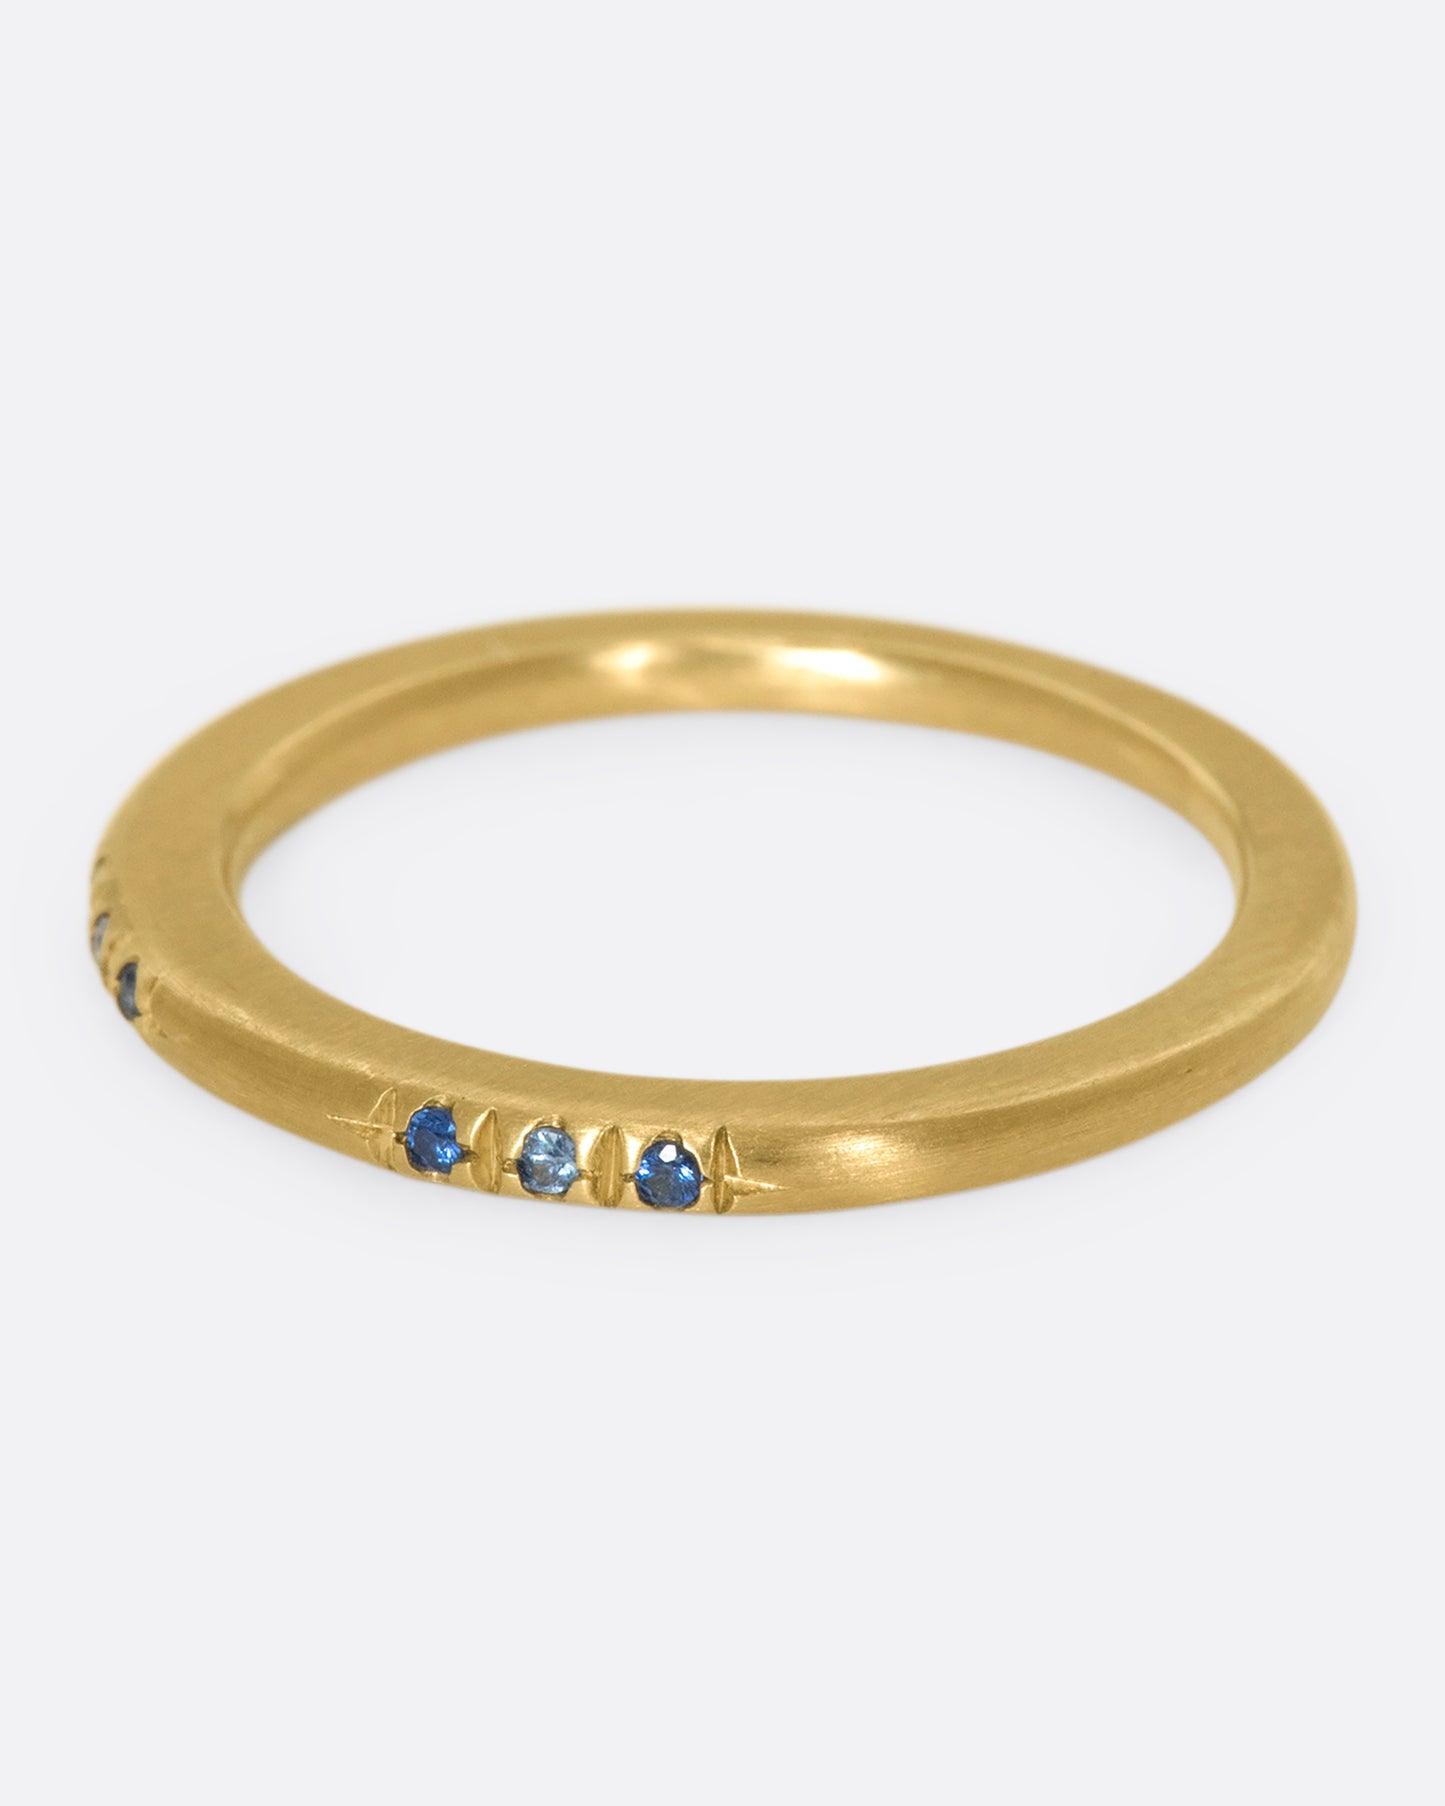 A 10k gold band with light and dark blue sapphires